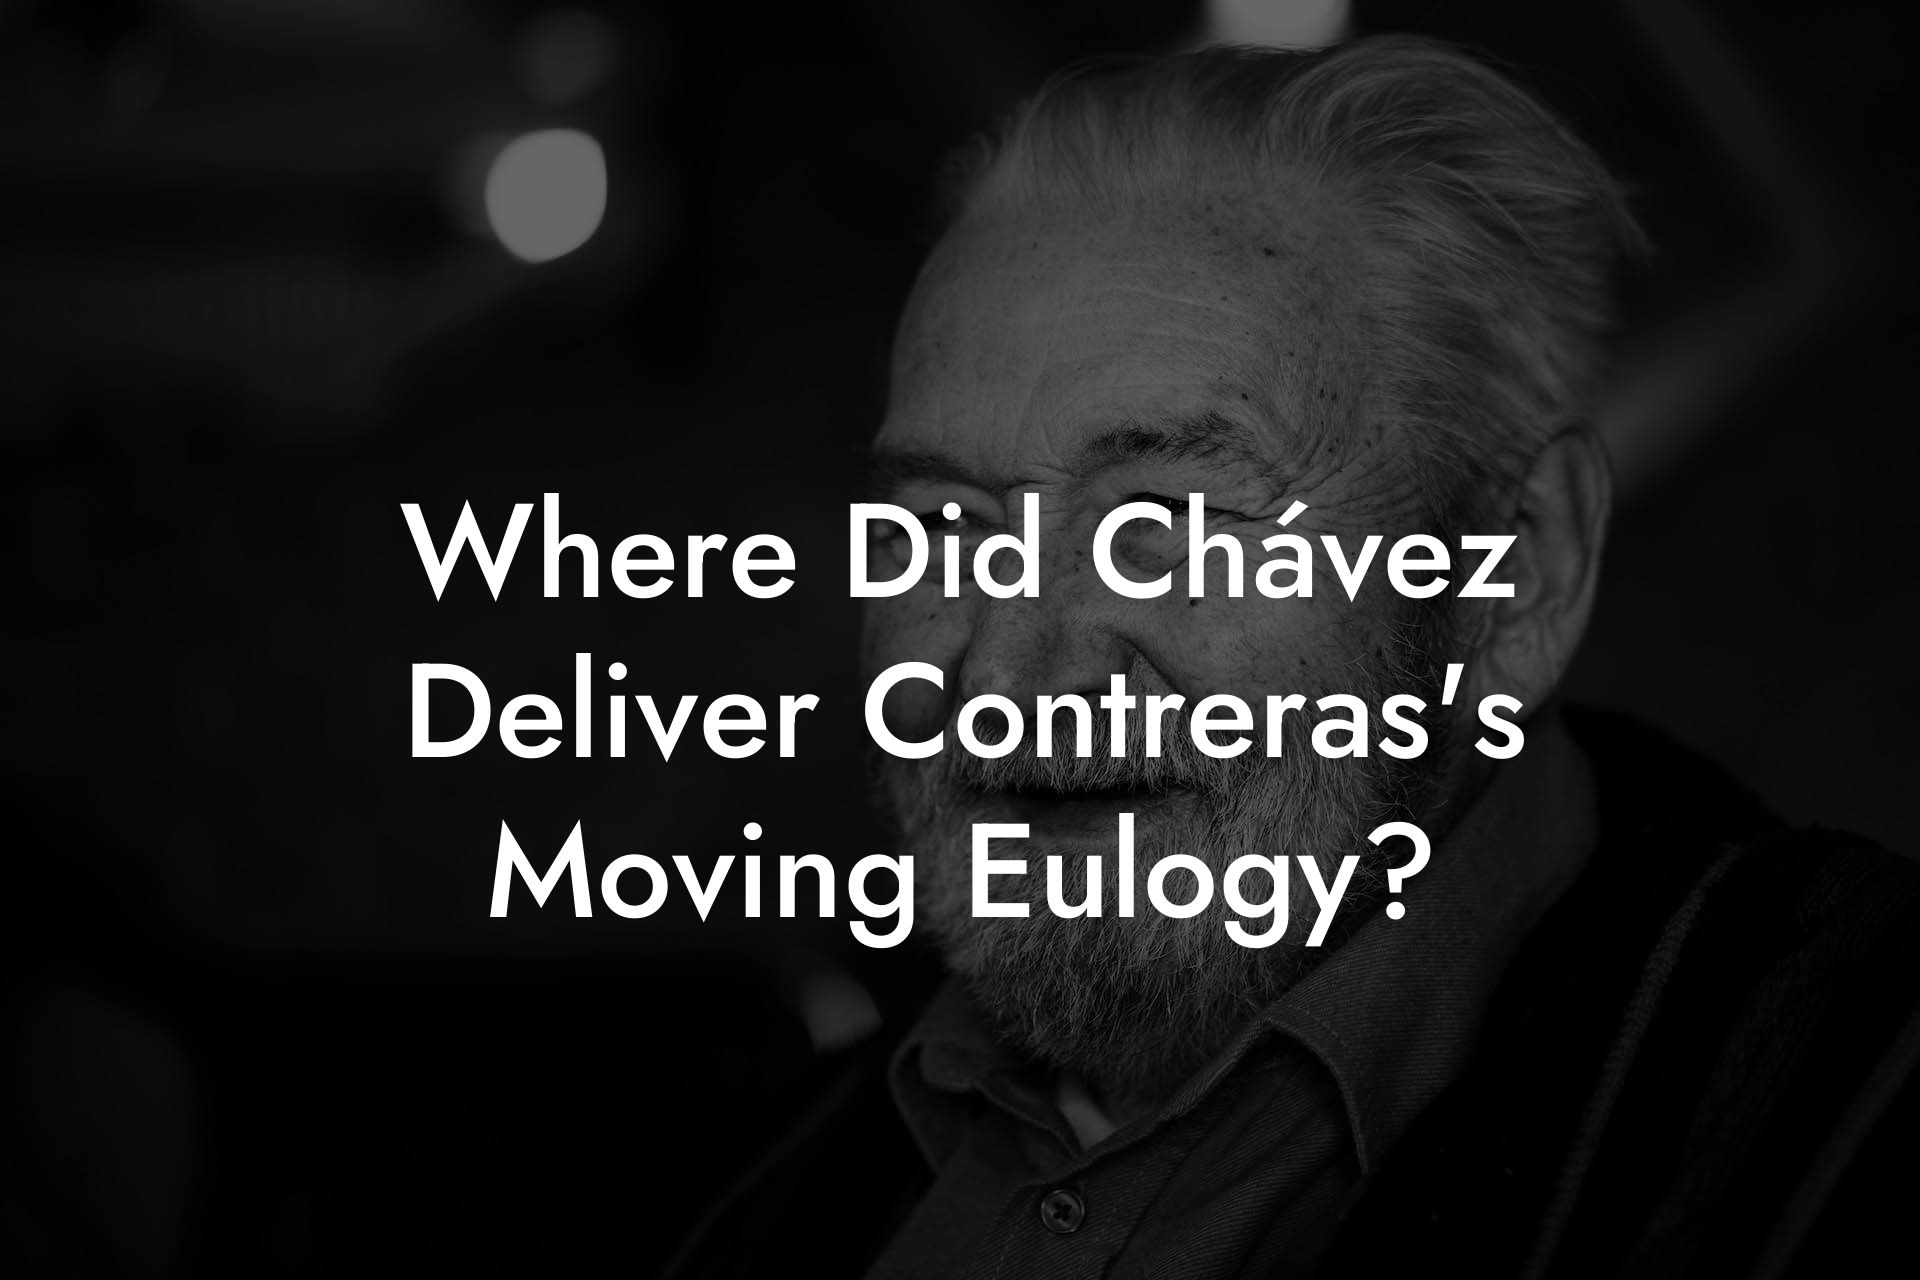 Where Did Chávez Deliver Contreras's Moving Eulogy